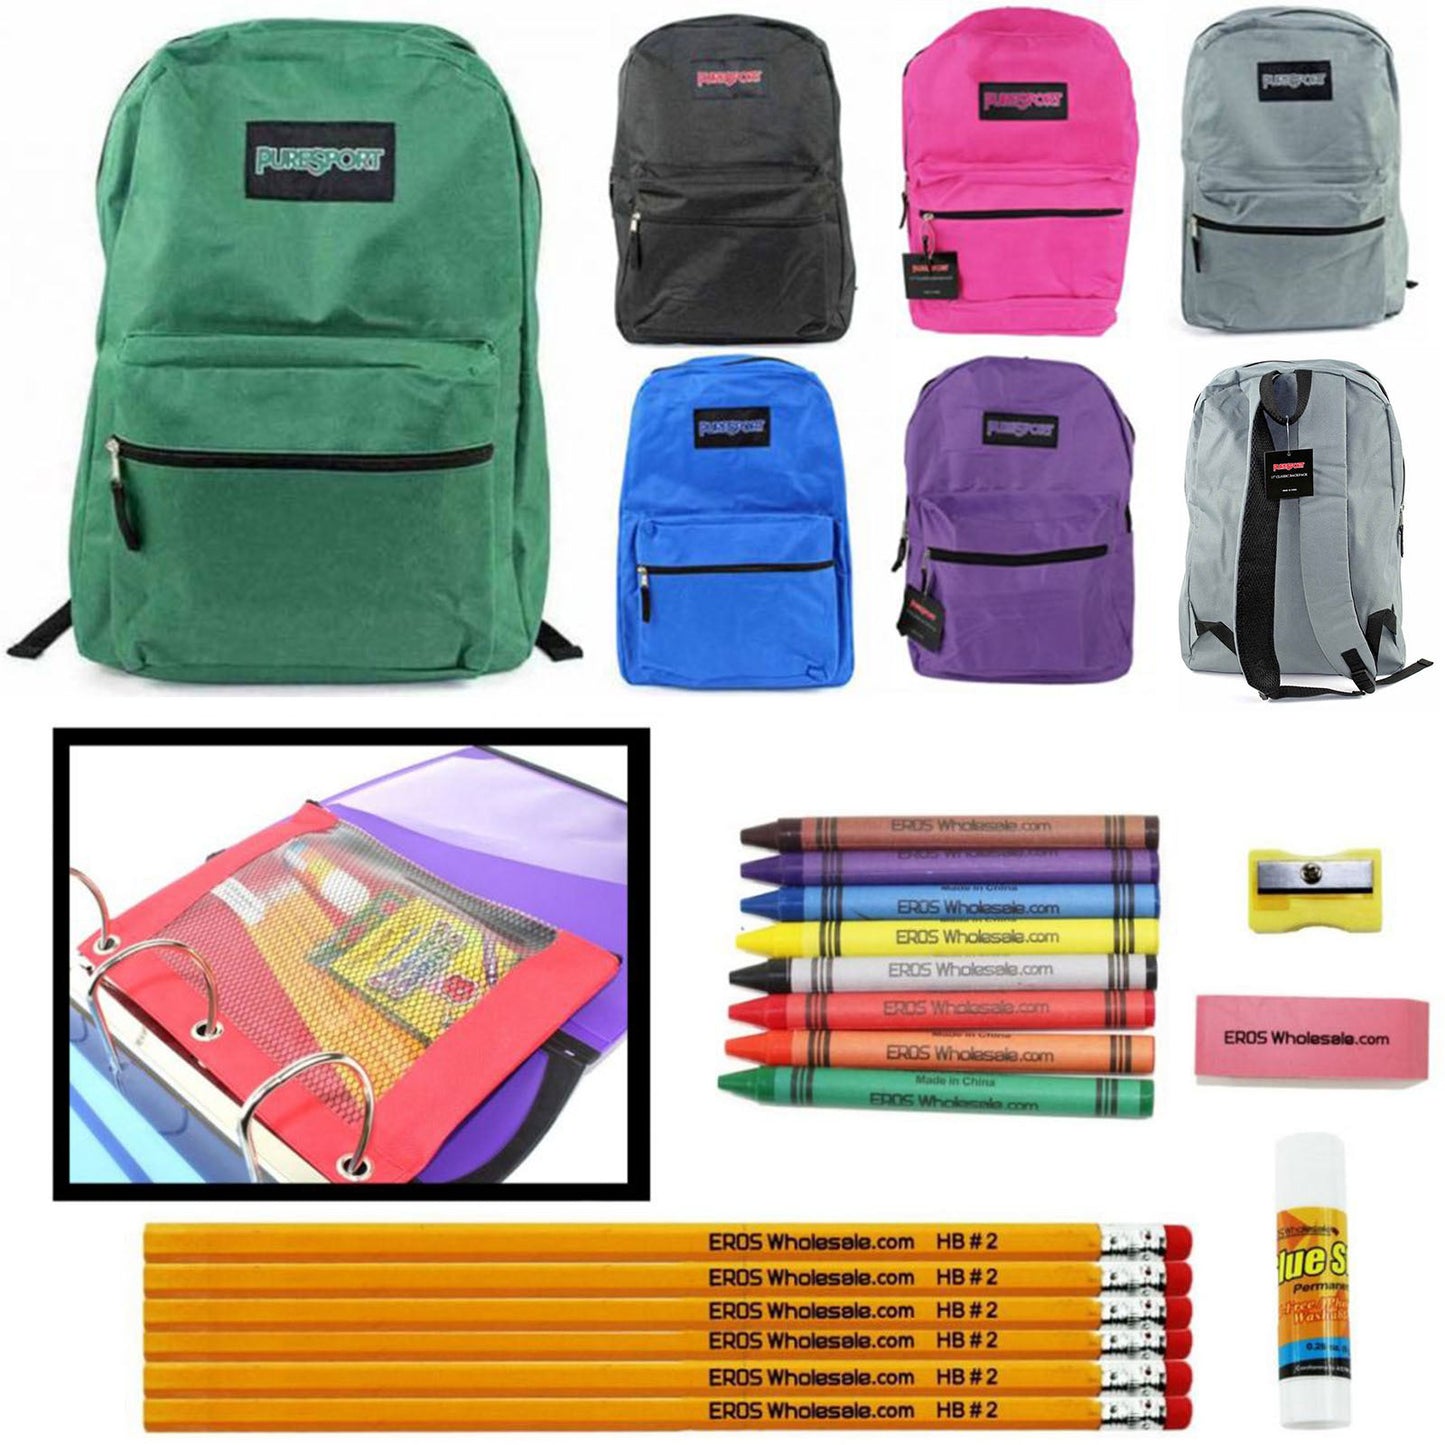 15" wholesale backpack for boys and girls with supply kits for back to school